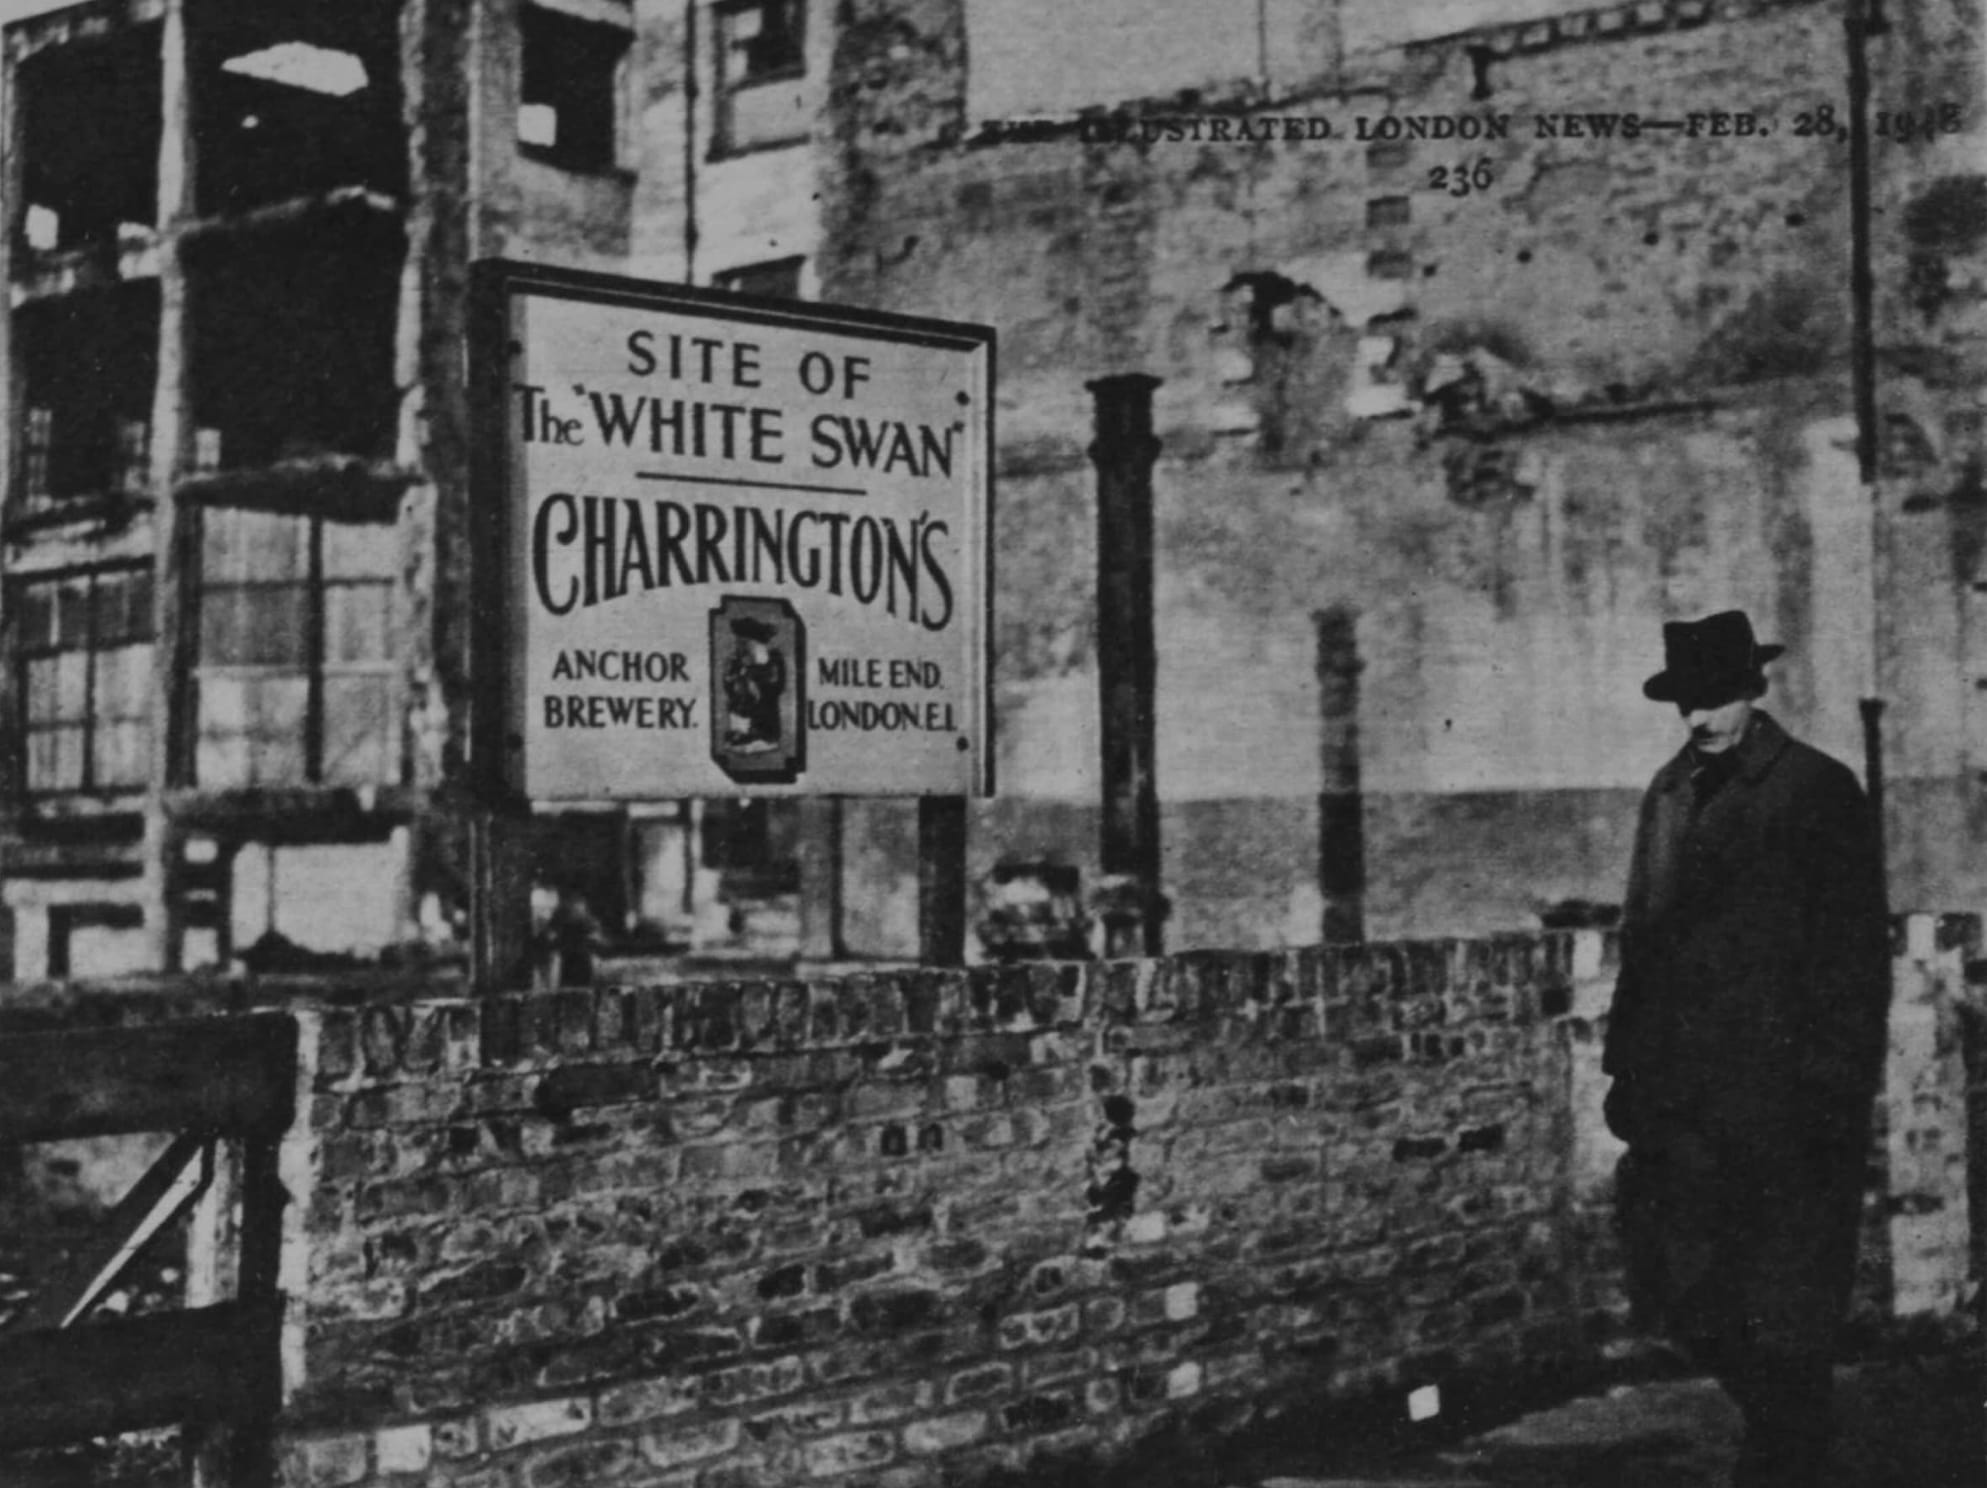 A man in black hat and coat walking in front of a wall with a hand-painted sign protruding above it on two posts. There are destroyed buildings behind the sign, which reads "Site of the 'White Swan'. Charrington's. Anchor Brewery, Mile End, London E1."